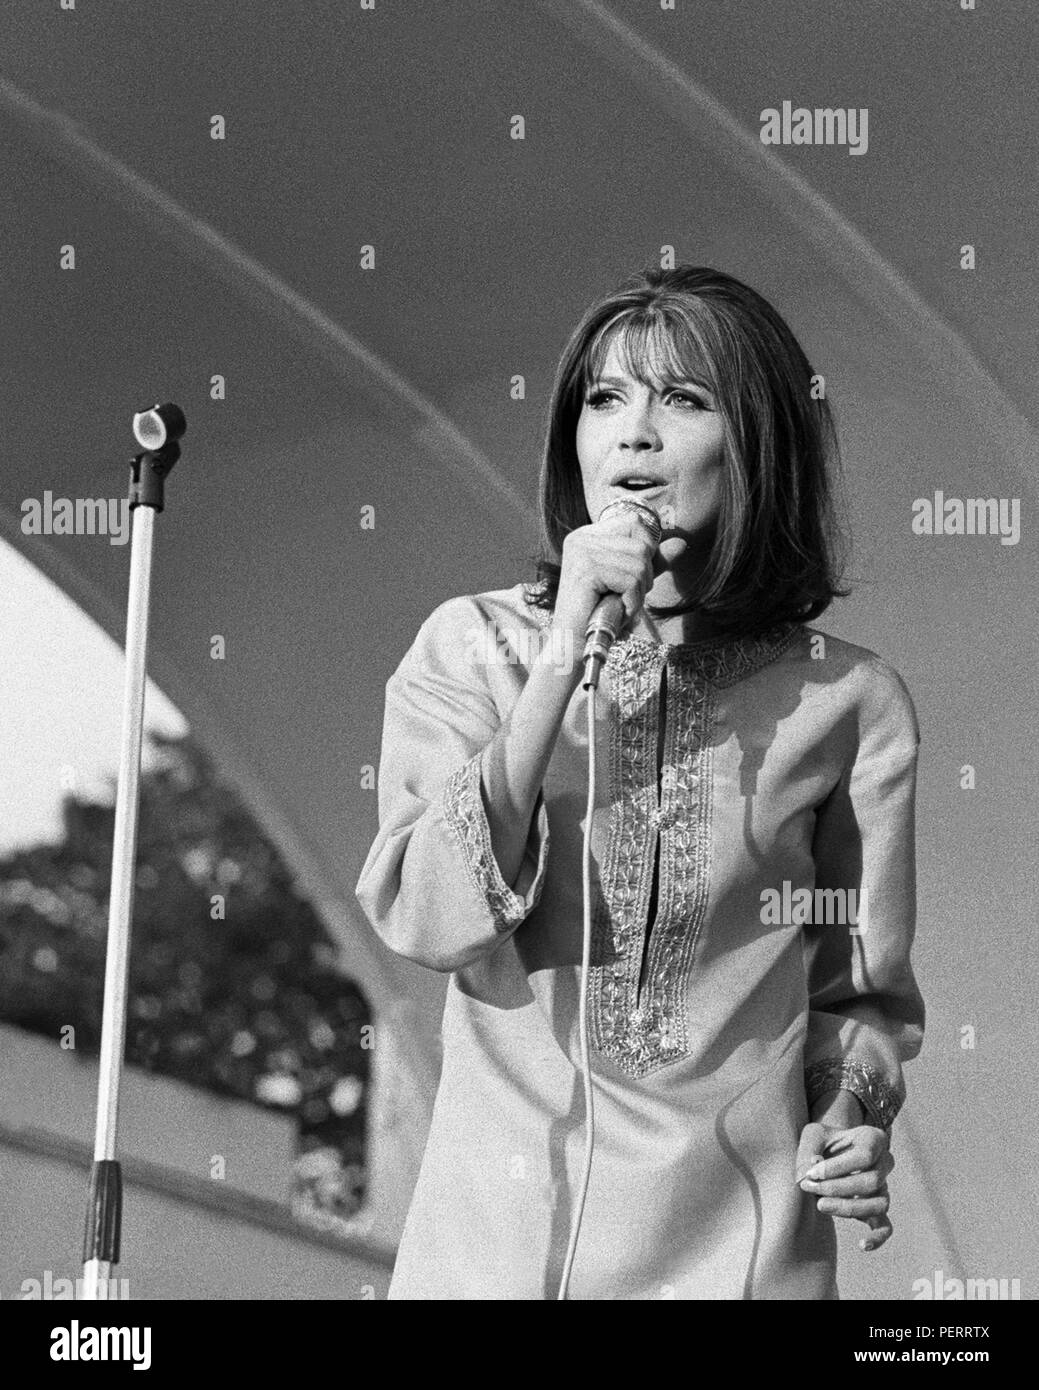 SANDIE SHAW British singer and winner of Eurovision song Contest on tour in Sweden and have concert at Gröna lund june 1967 Stock Photo